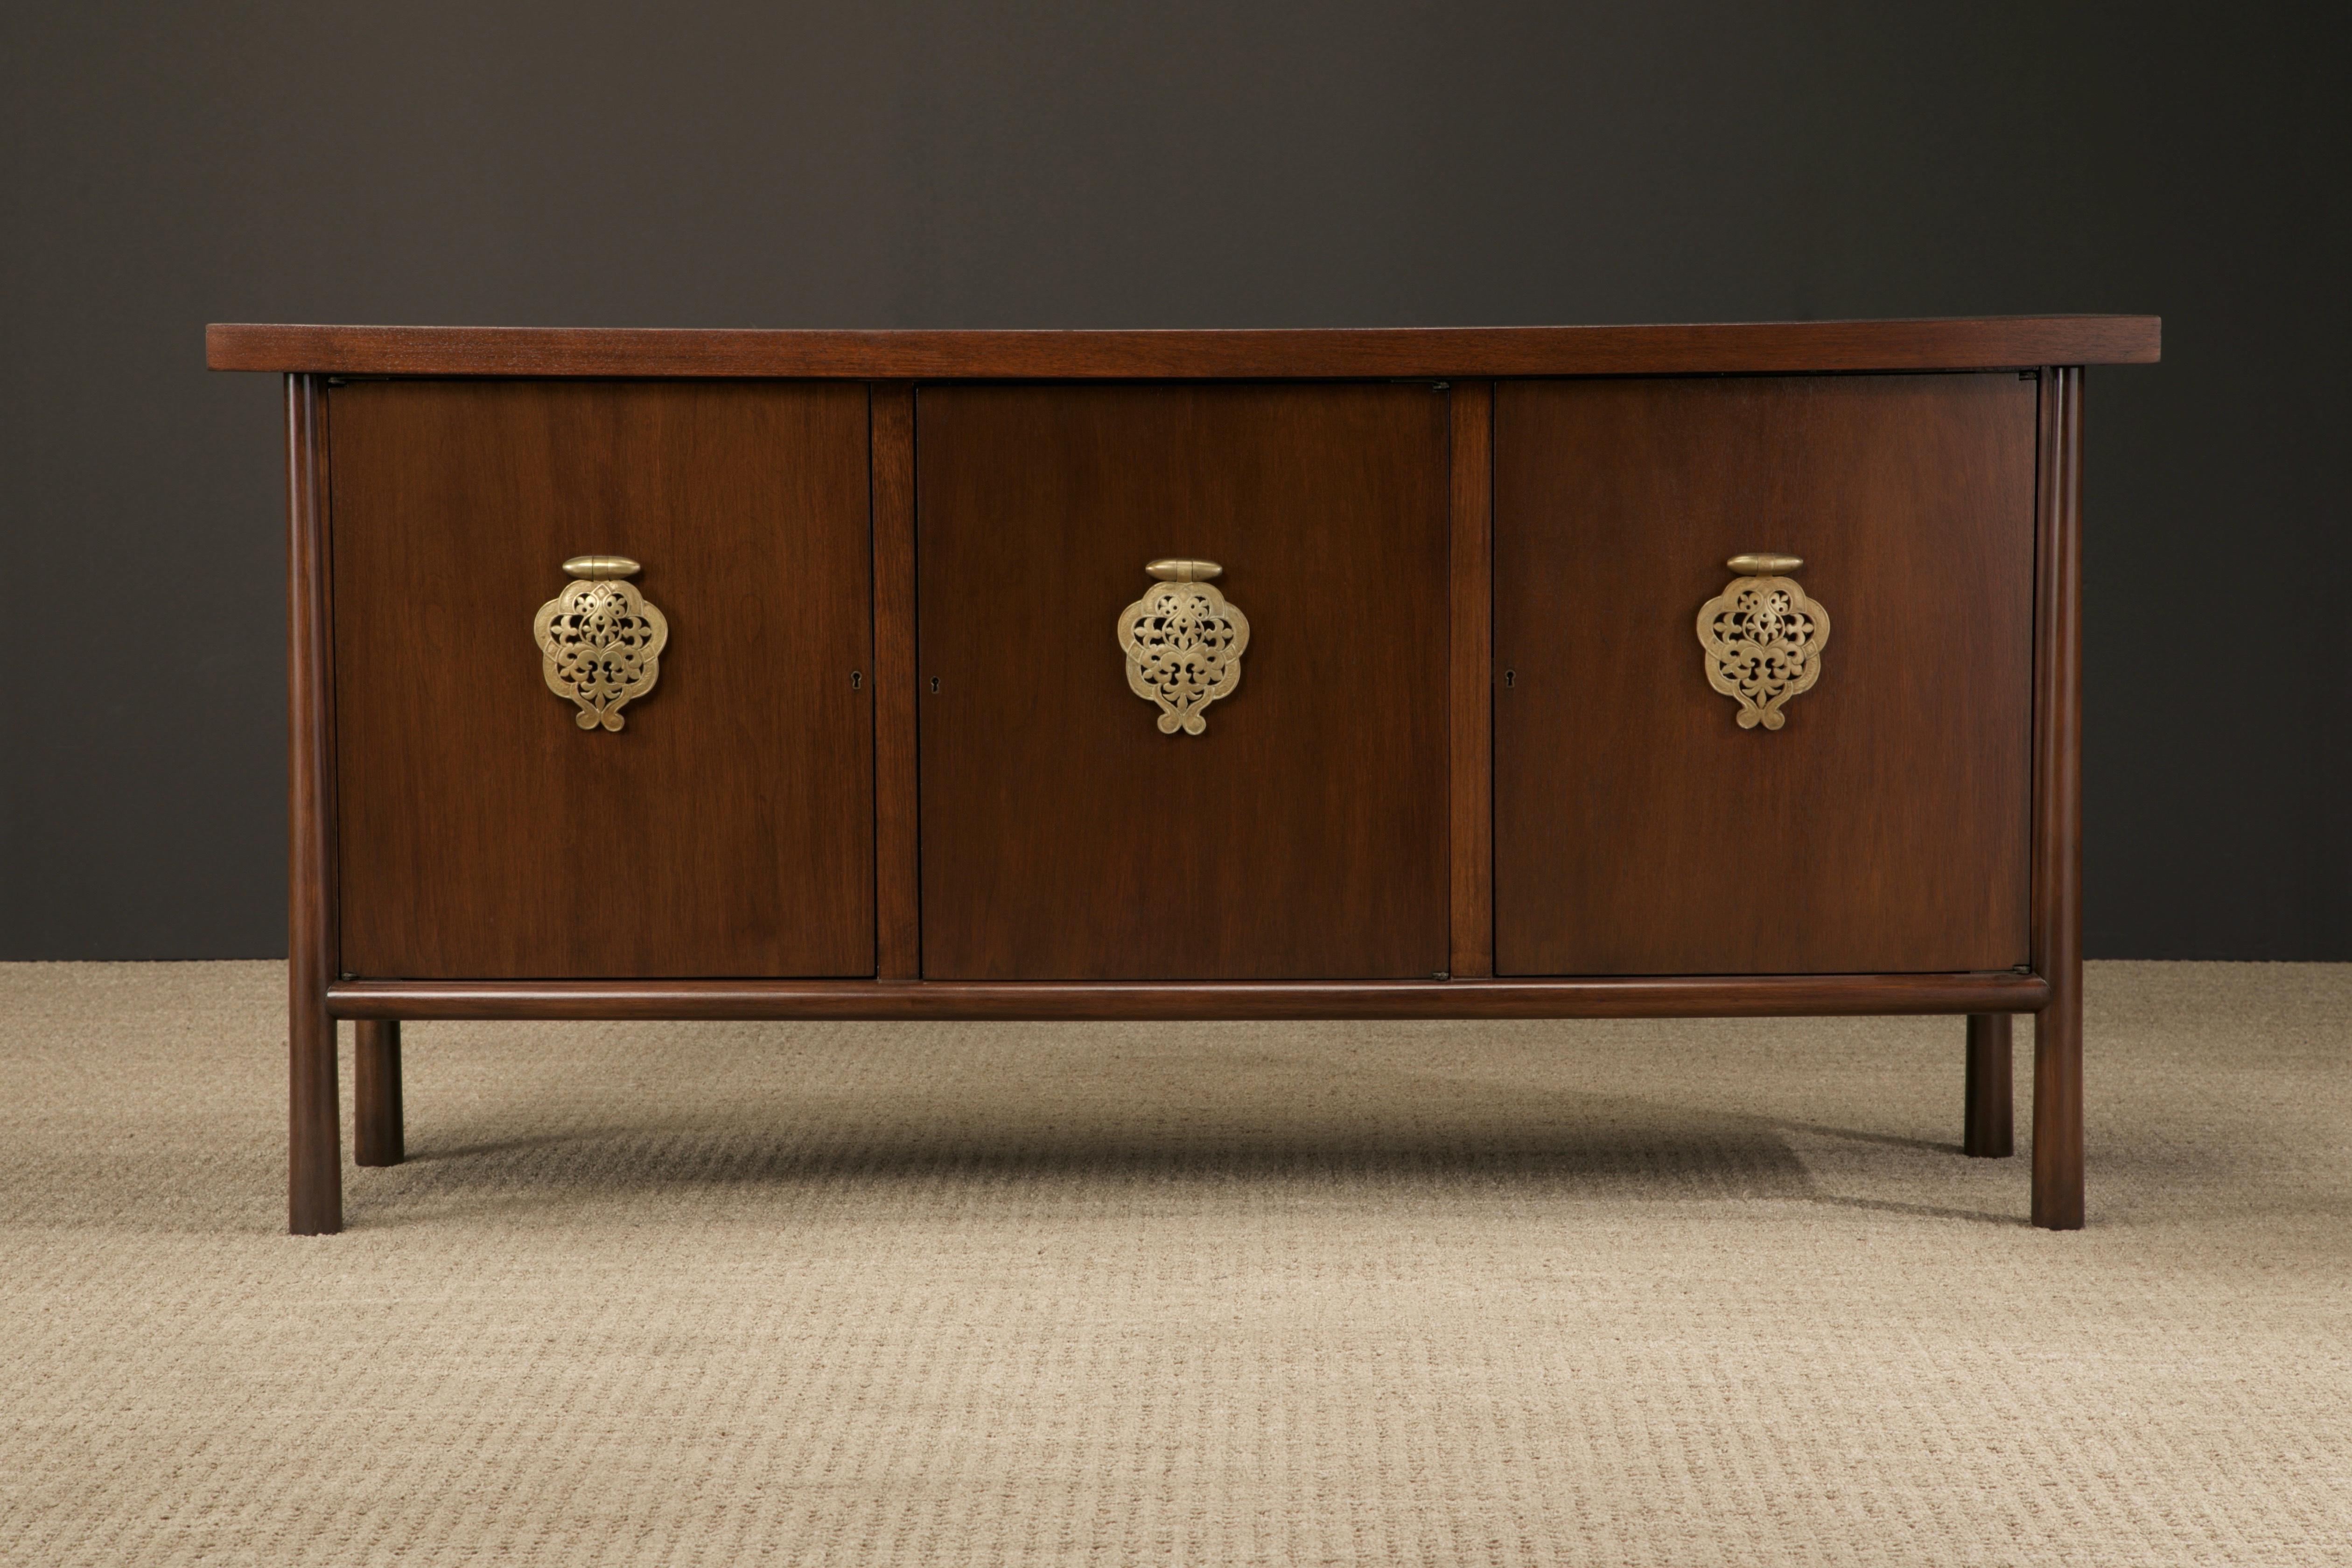 This elegant fully restored 'Ming' sideboard by T.H. Robsjohn-Gibbings for Widdicomb (USA) features gorgeous walnut grain with large brass handles. The center cabinet has four internal pull out drawers, the top two with fabric lined silverware